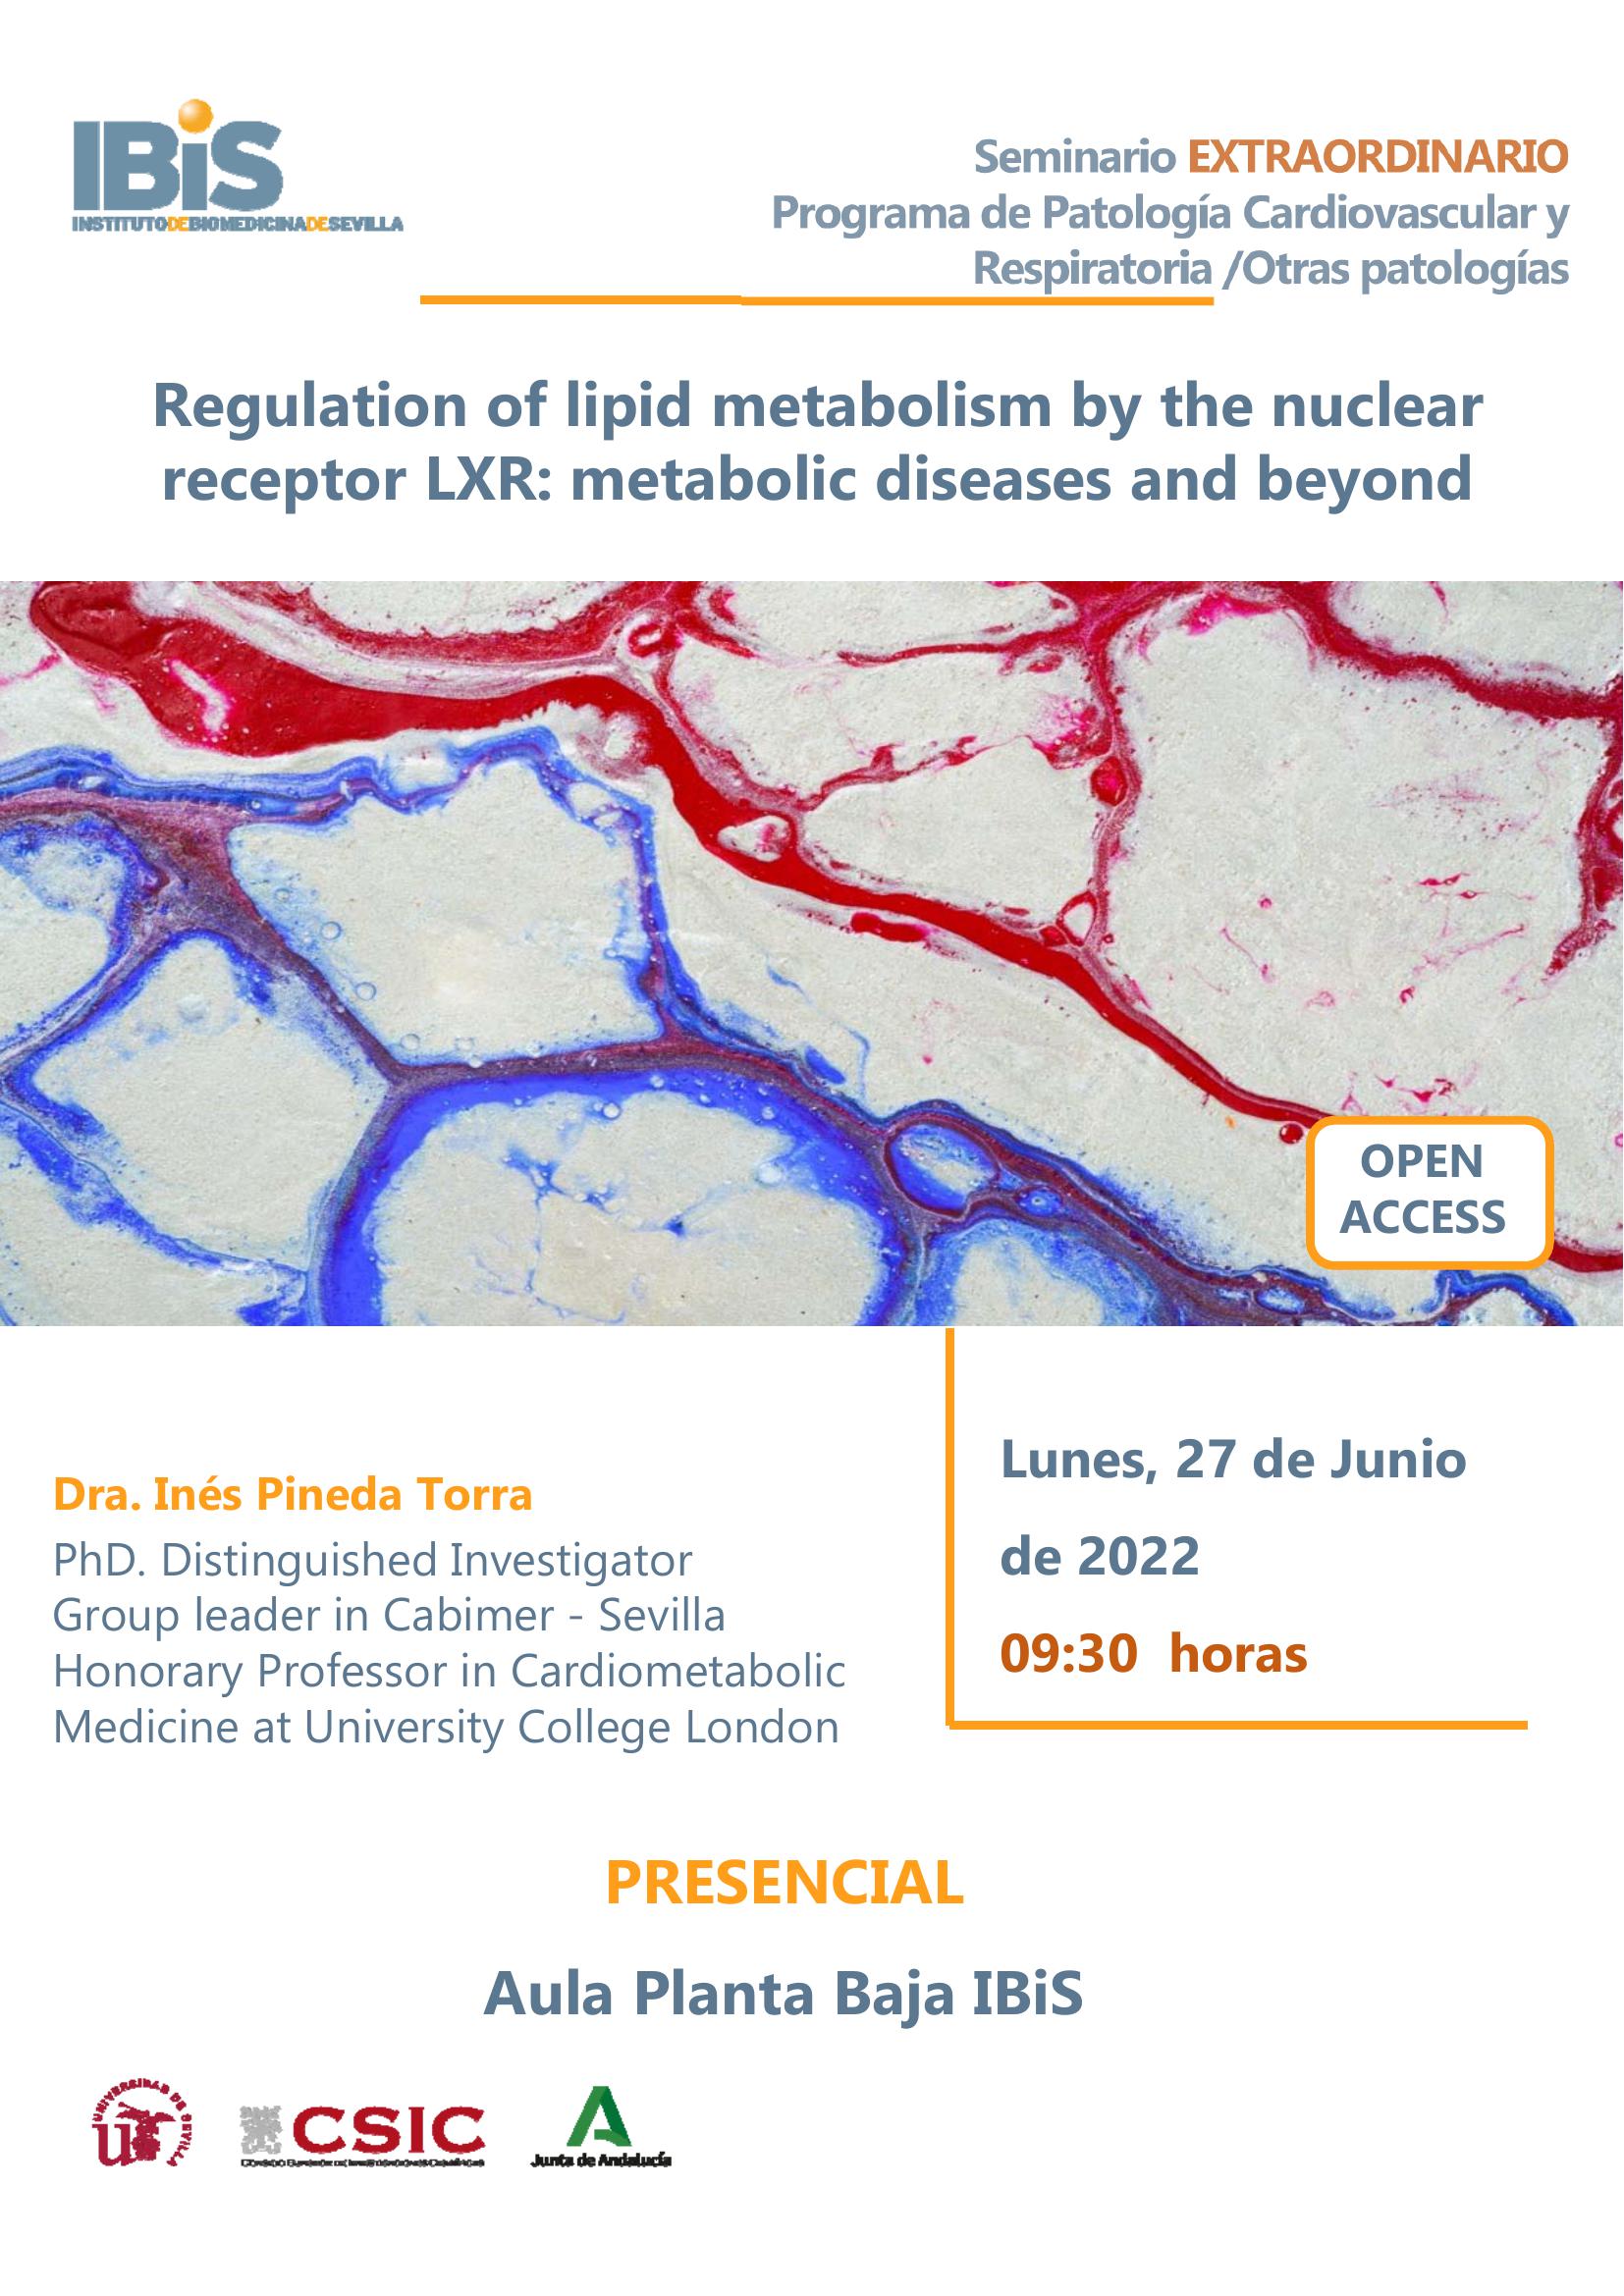 Poster: Regulation of lipid metabolism by the nuclear receptor LXR: metabolic diseases and beyond